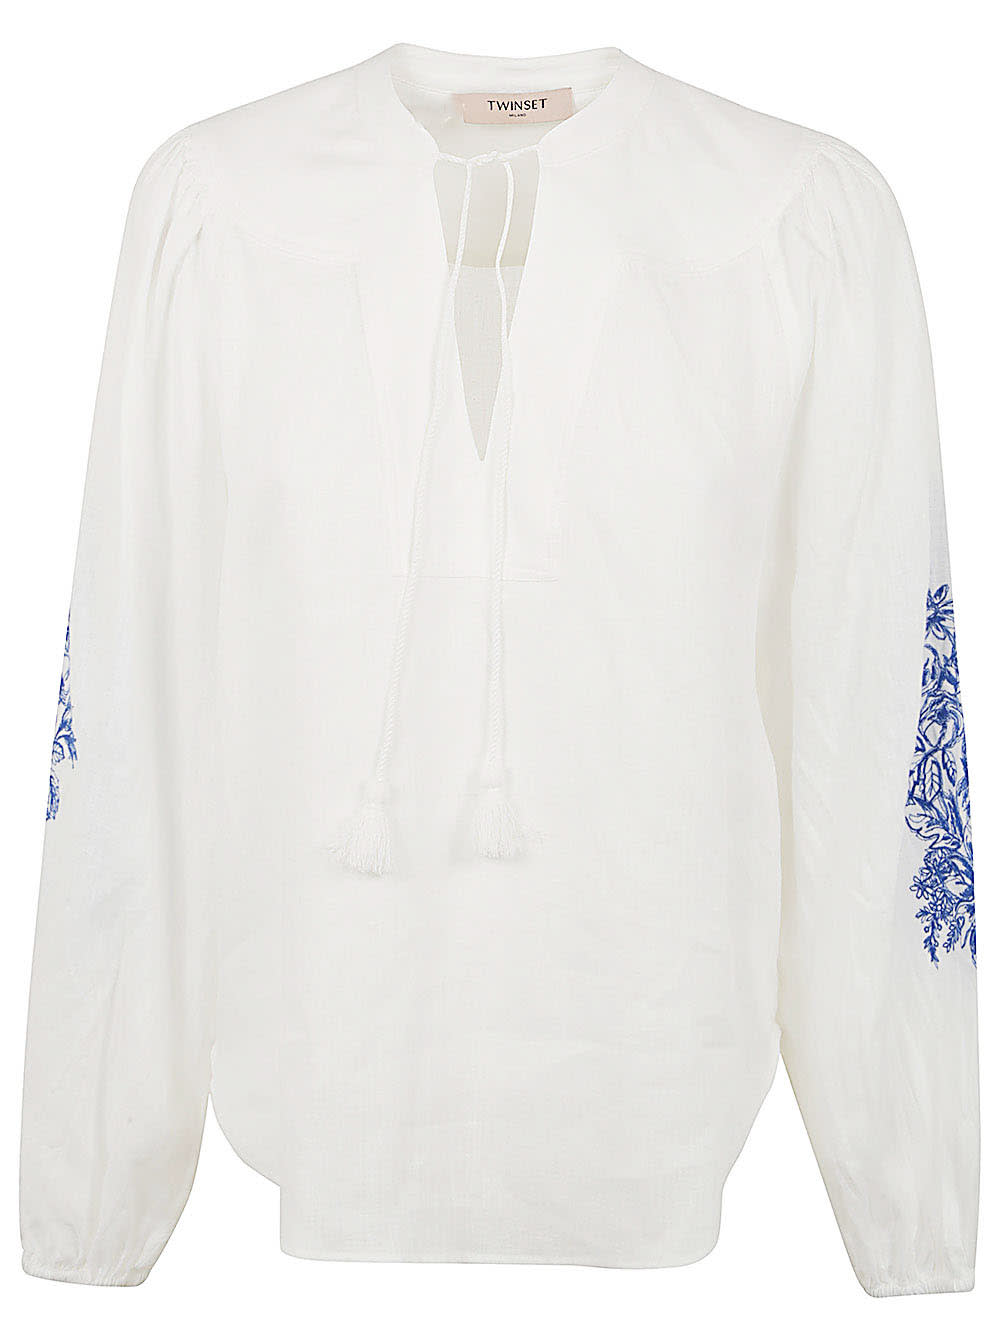 Twinset Embroidered Long Sleeve Shirt In Blue White